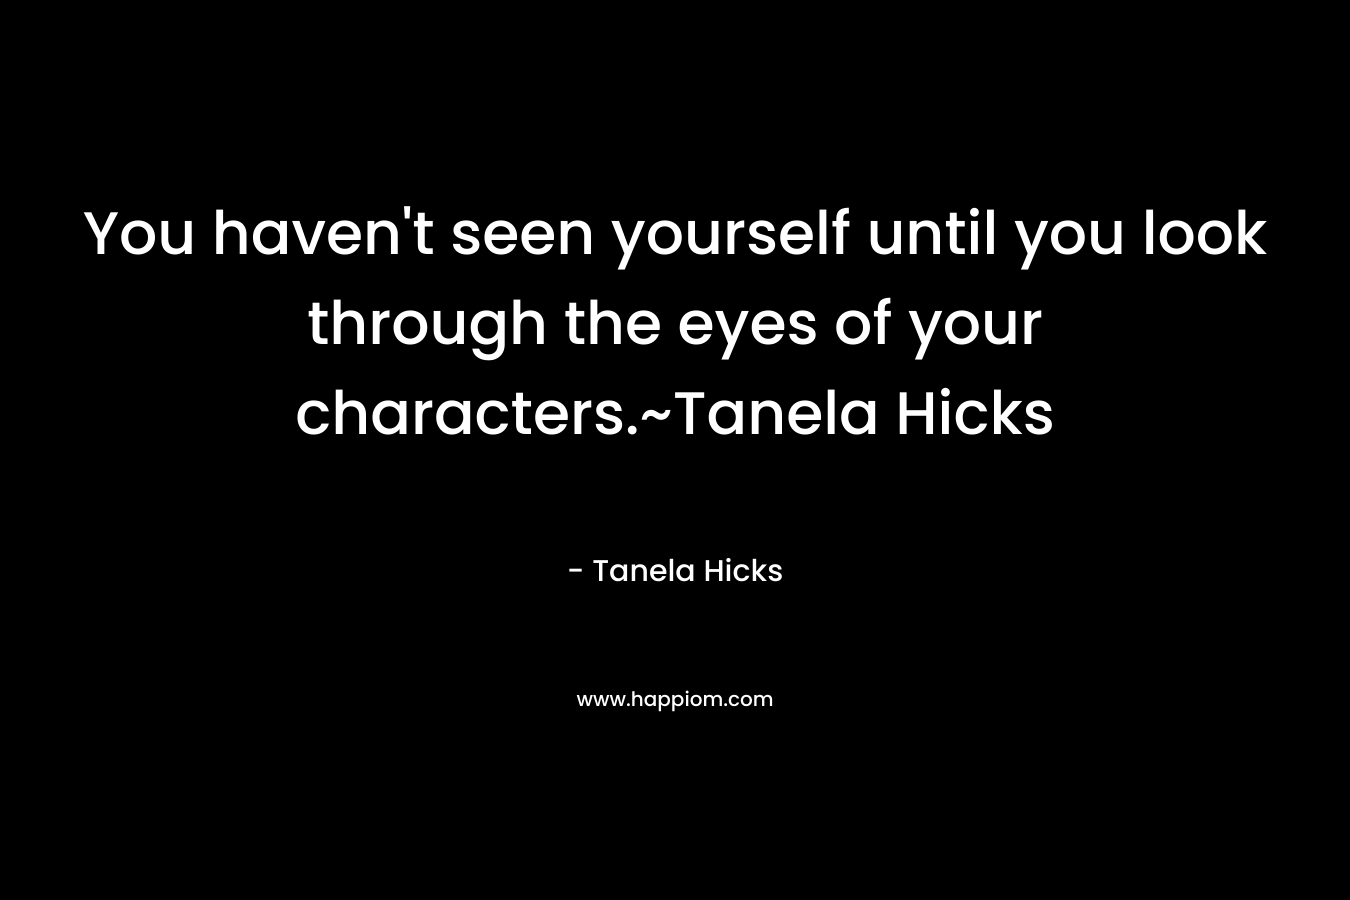 You haven't seen yourself until you look through the eyes of your characters.~Tanela Hicks